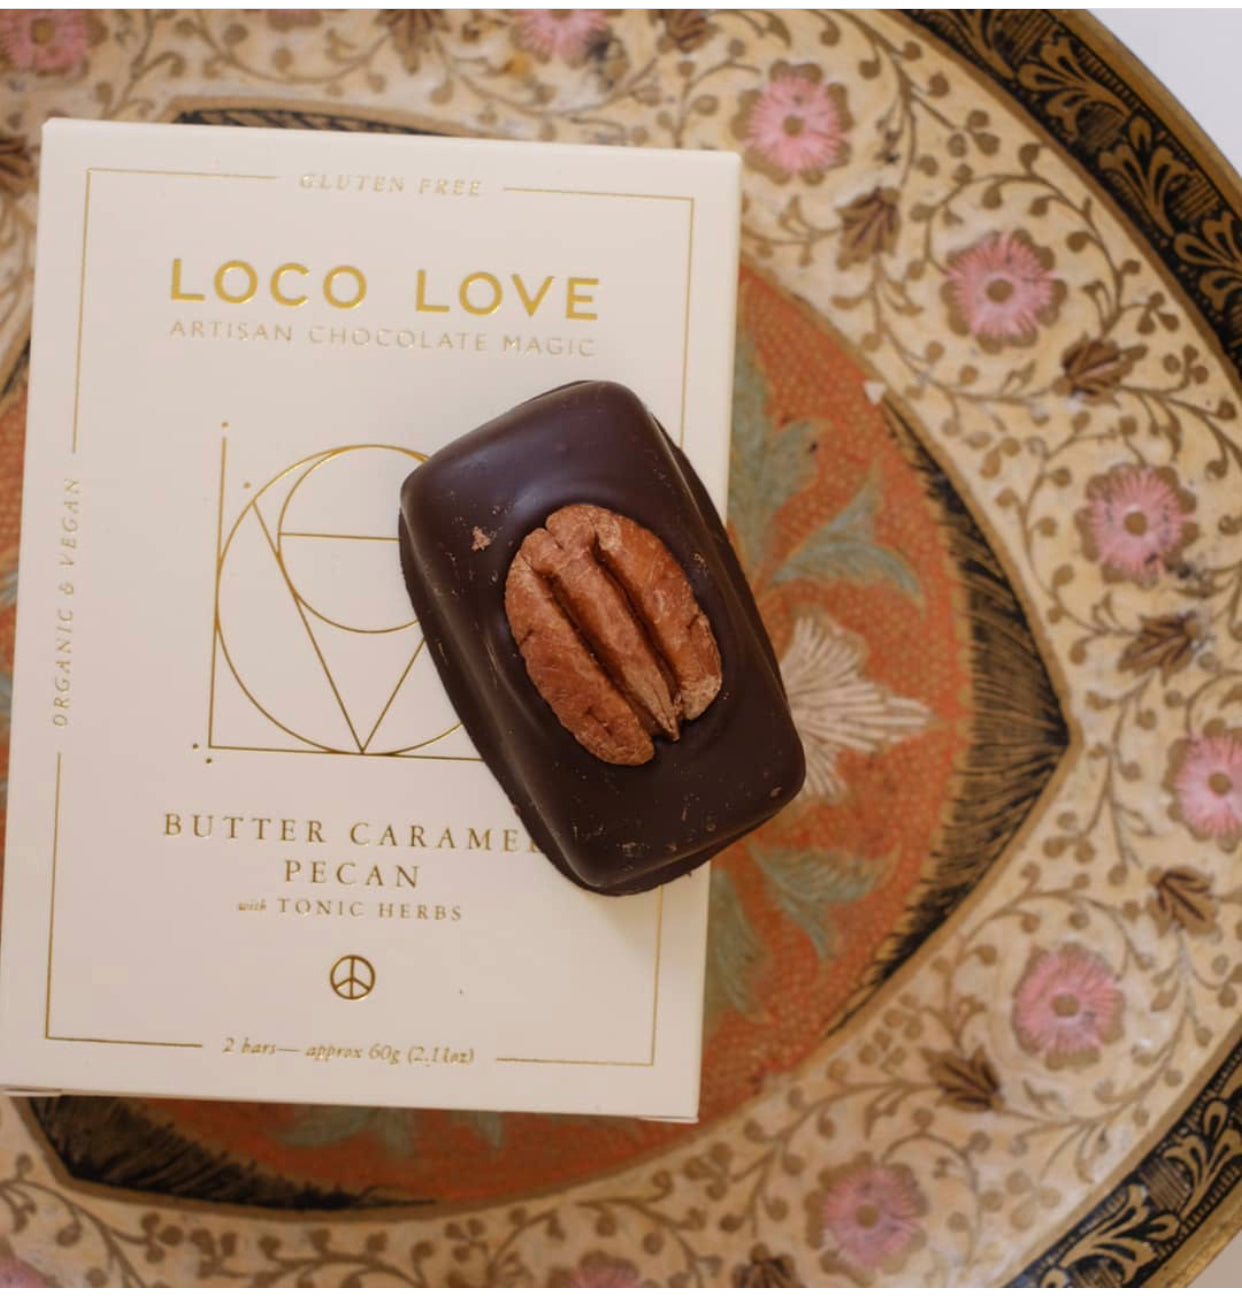 LOCO LOVE BUTTER CARAMEL PECAN WITH TONIC HERBS